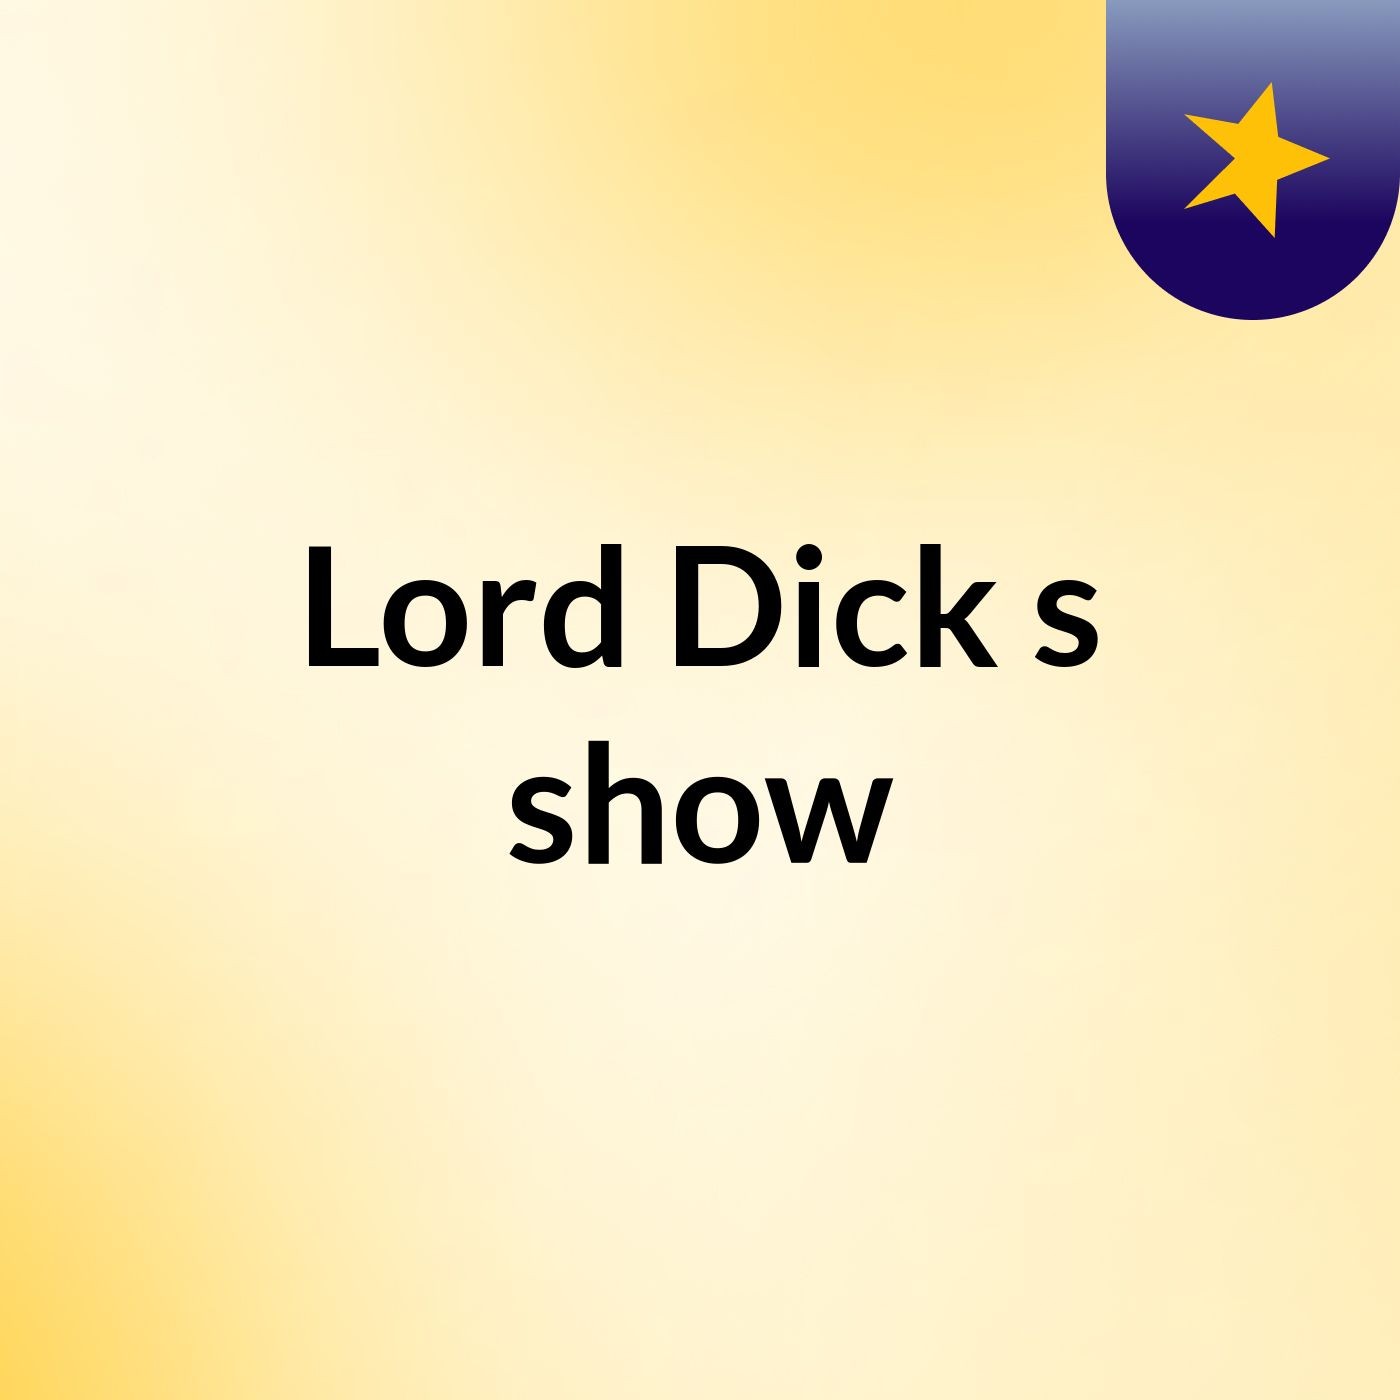 Lord Dick's show